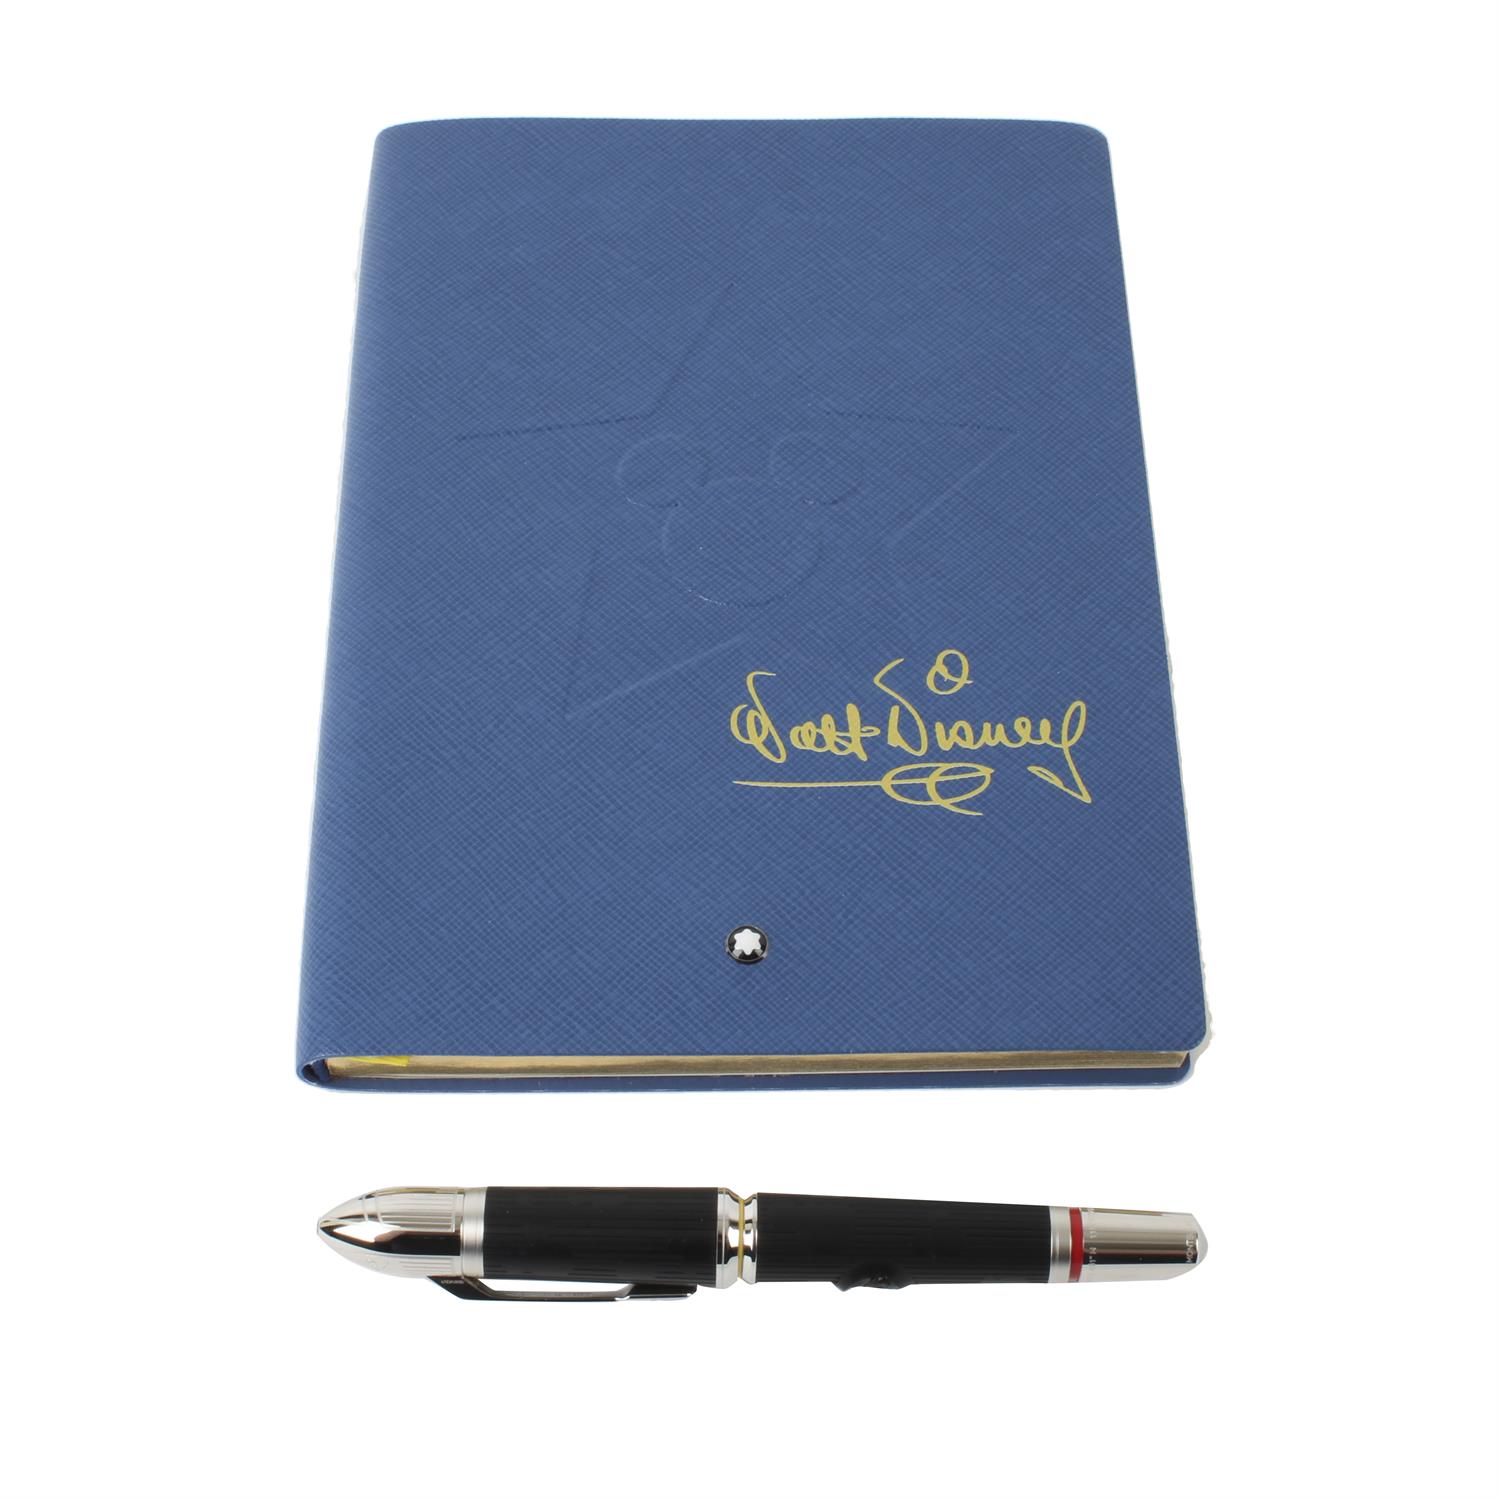 Montblanc Special Edition Walt Disney notebook and pen